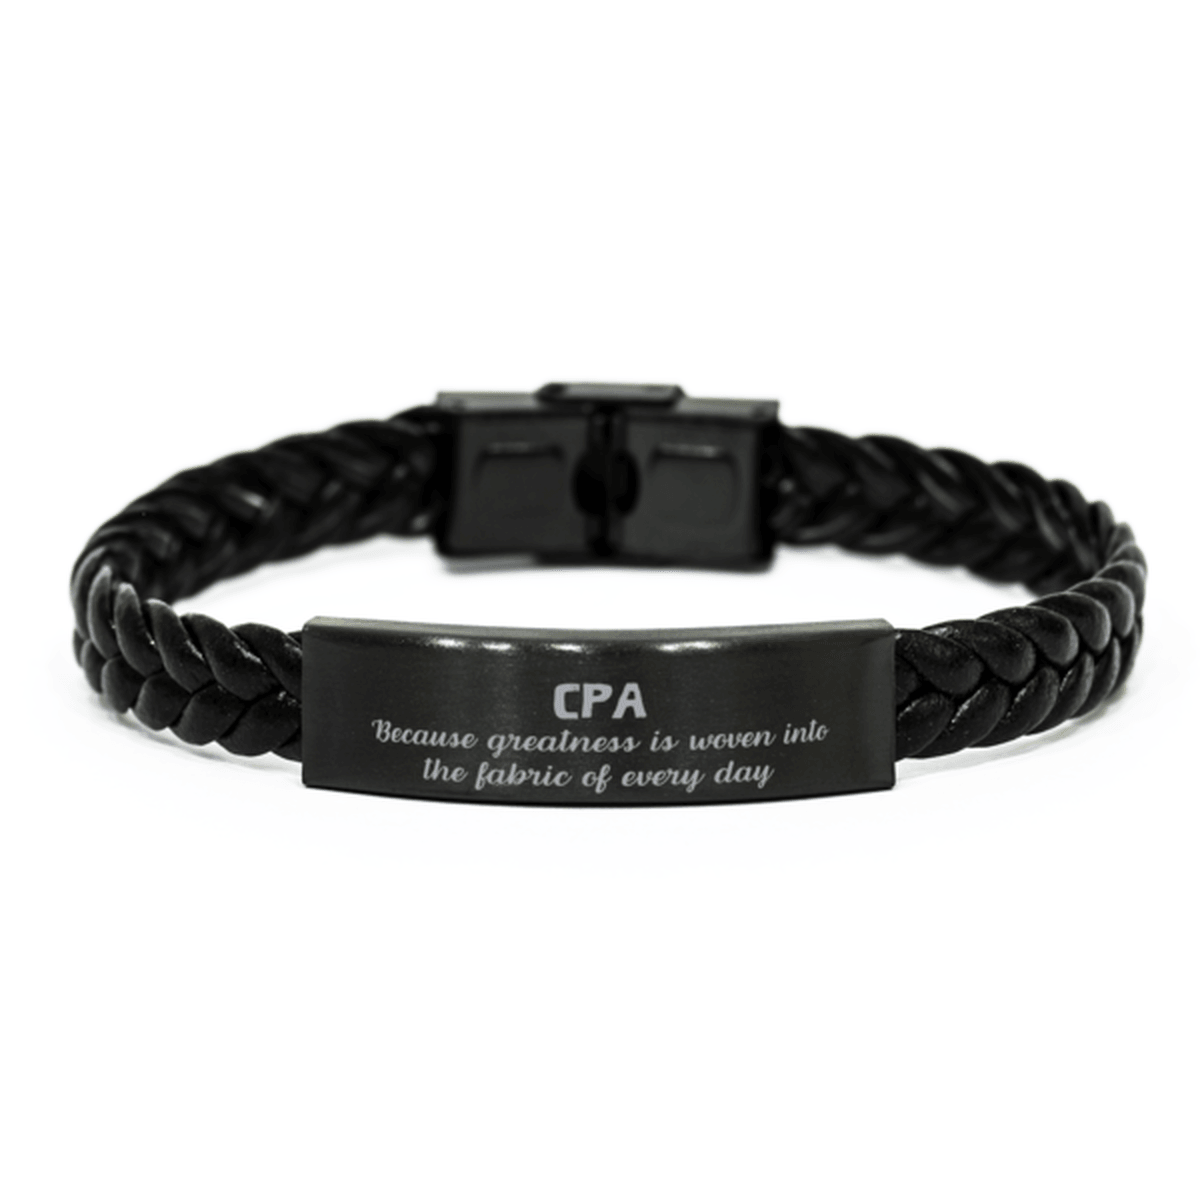 Sarcastic CPA Braided Leather Bracelet Gifts, Christmas Holiday Gifts for CPA Birthday, CPA: Because greatness is woven into the fabric of every day, Coworkers, Friends - Mallard Moon Gift Shop